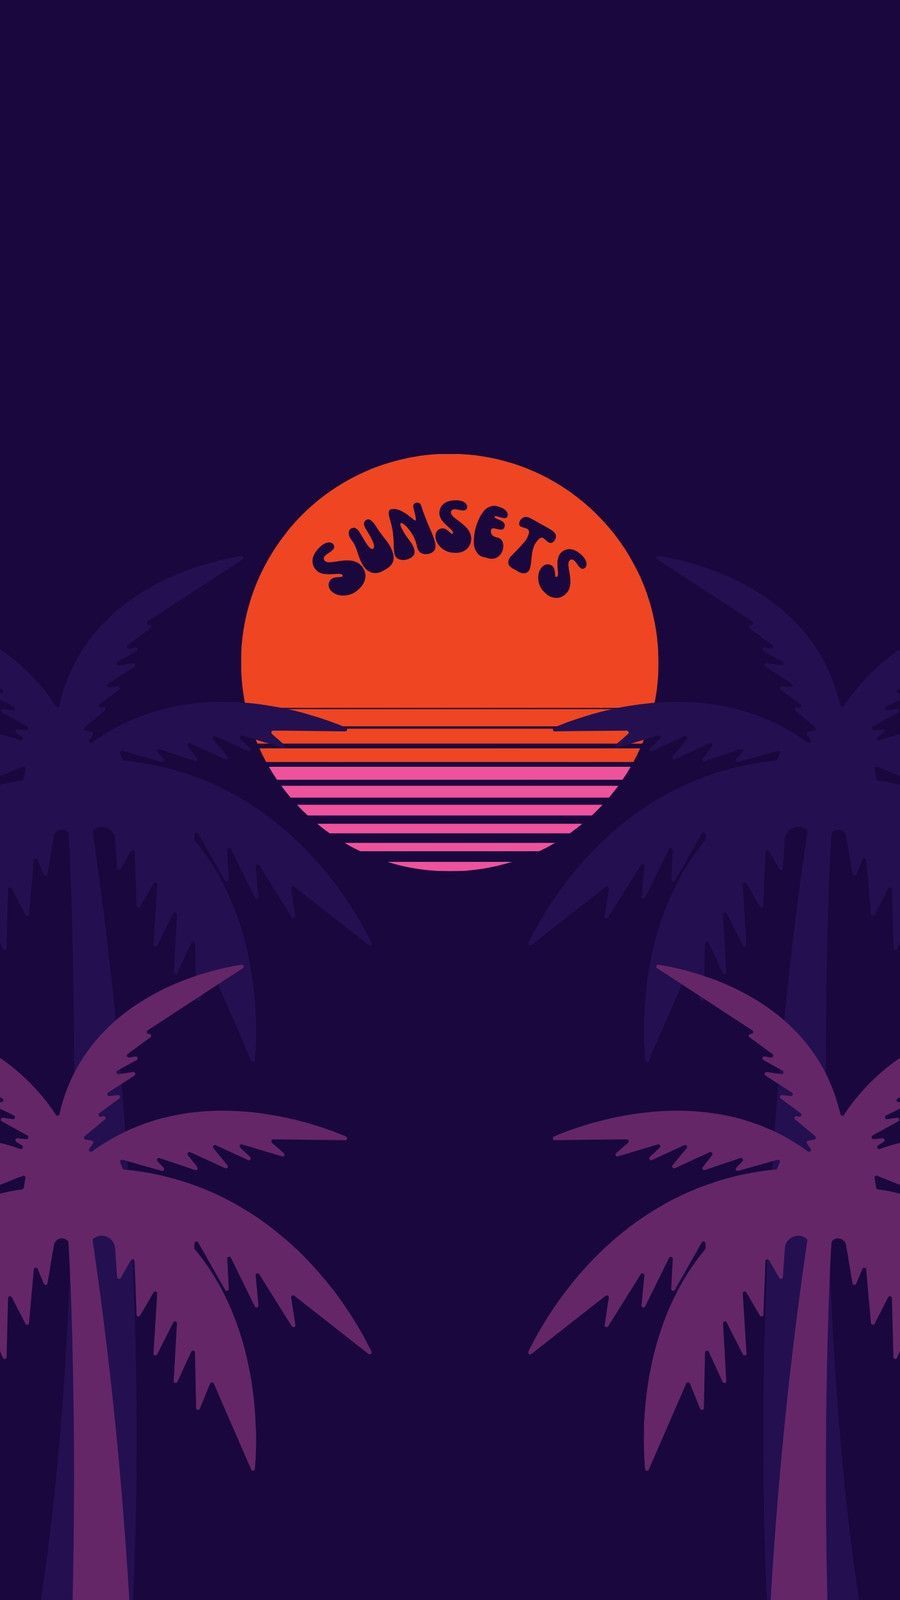 A sunset with palm trees wallpaper - Coconut, witch, purple, colorful